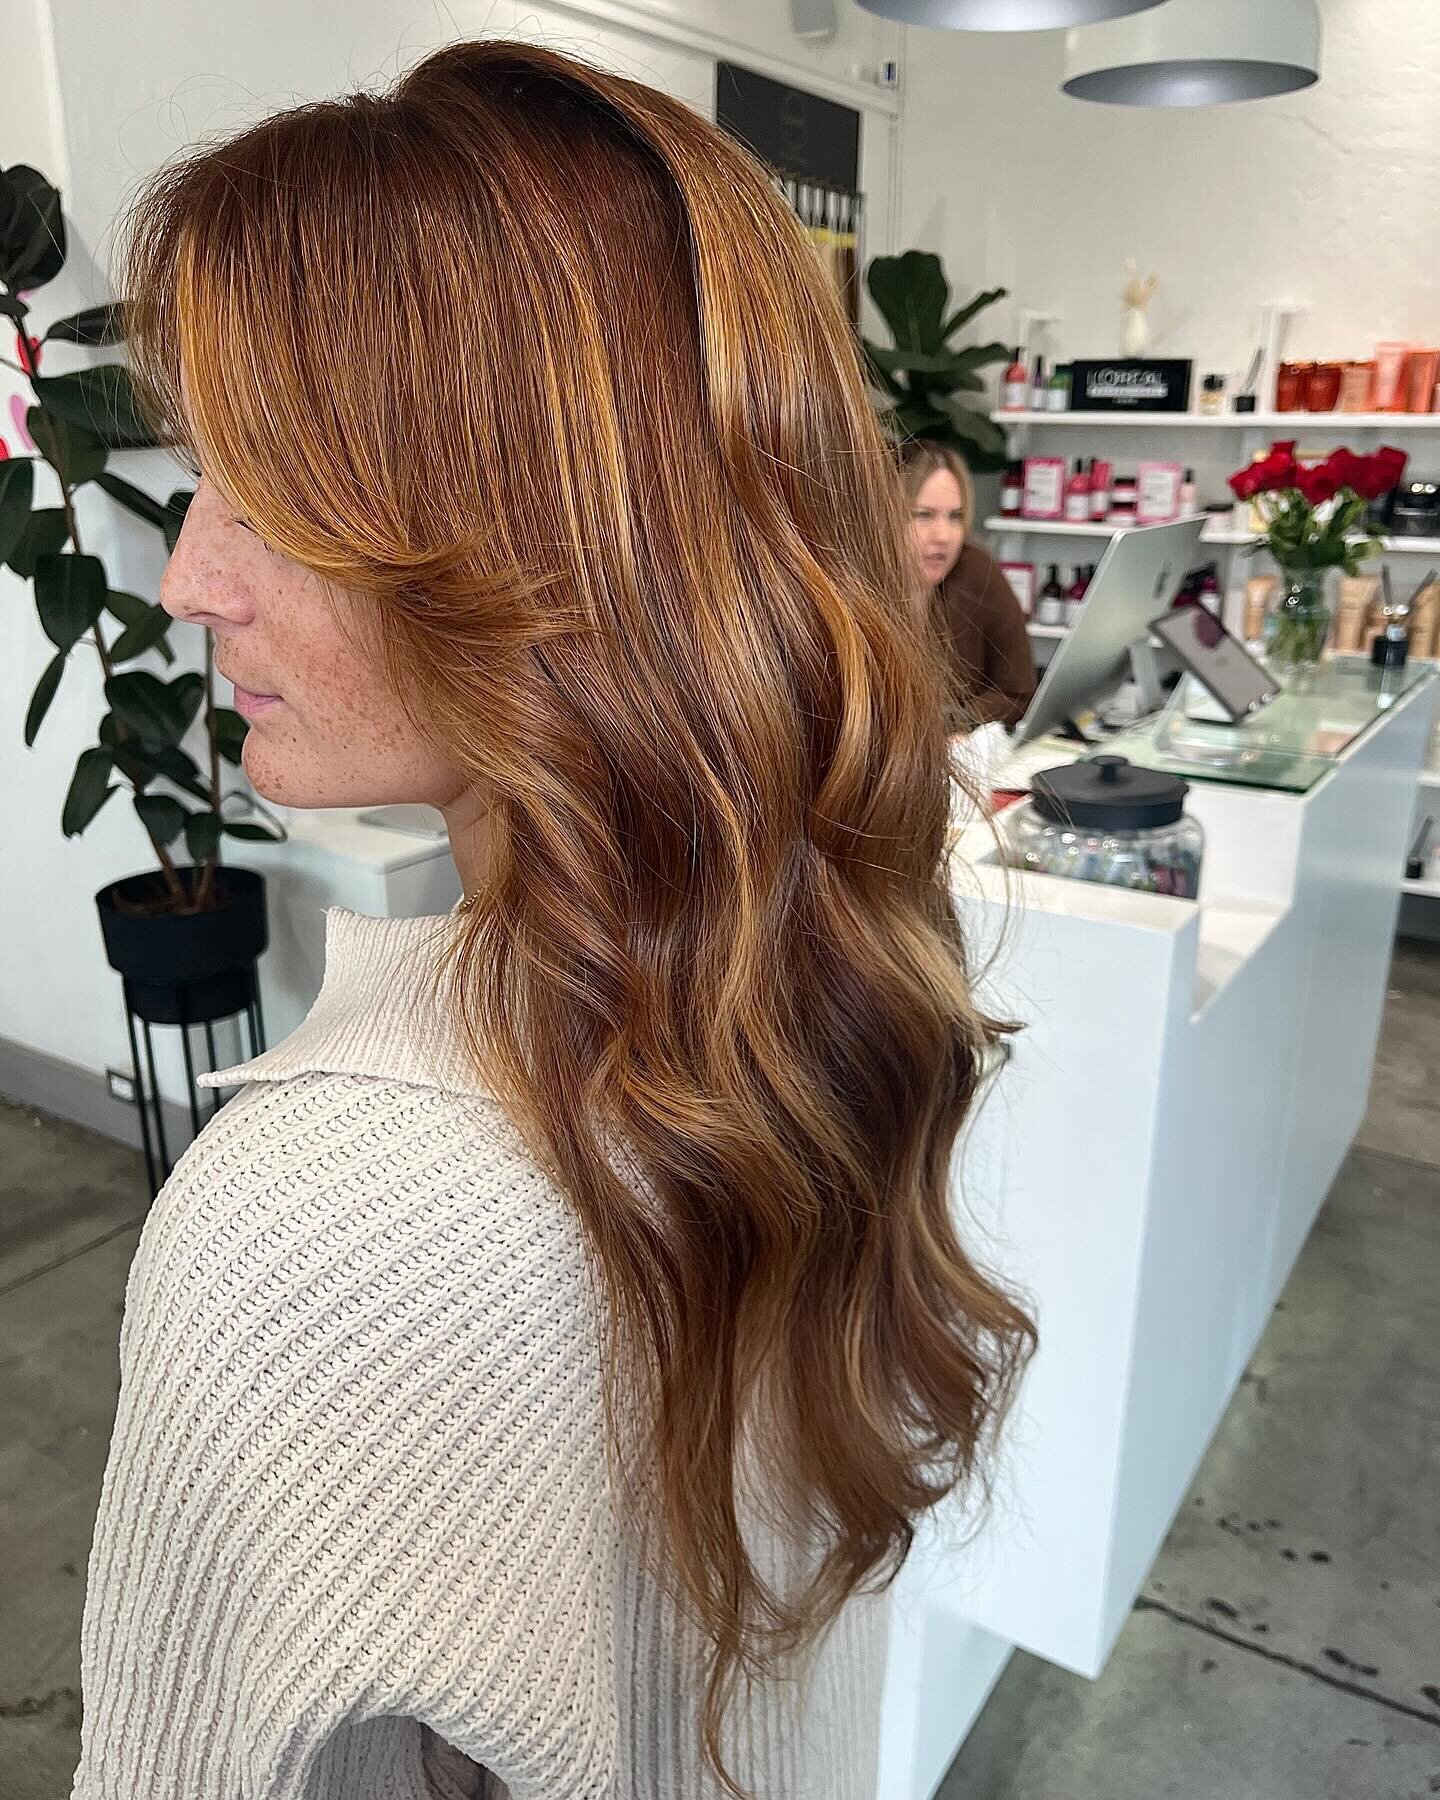 Nothing like a dimensional vibrant red/copper balayage moment to brighten up your day ✨ style by @kerimakemeblonde 

&bull;
&bull;
&bull;
&bull;
&bull;
&bull;
&bull;

#sandiegohairstylist #sandiegohairextensionspecialist #sandiegohairsalon #dimension